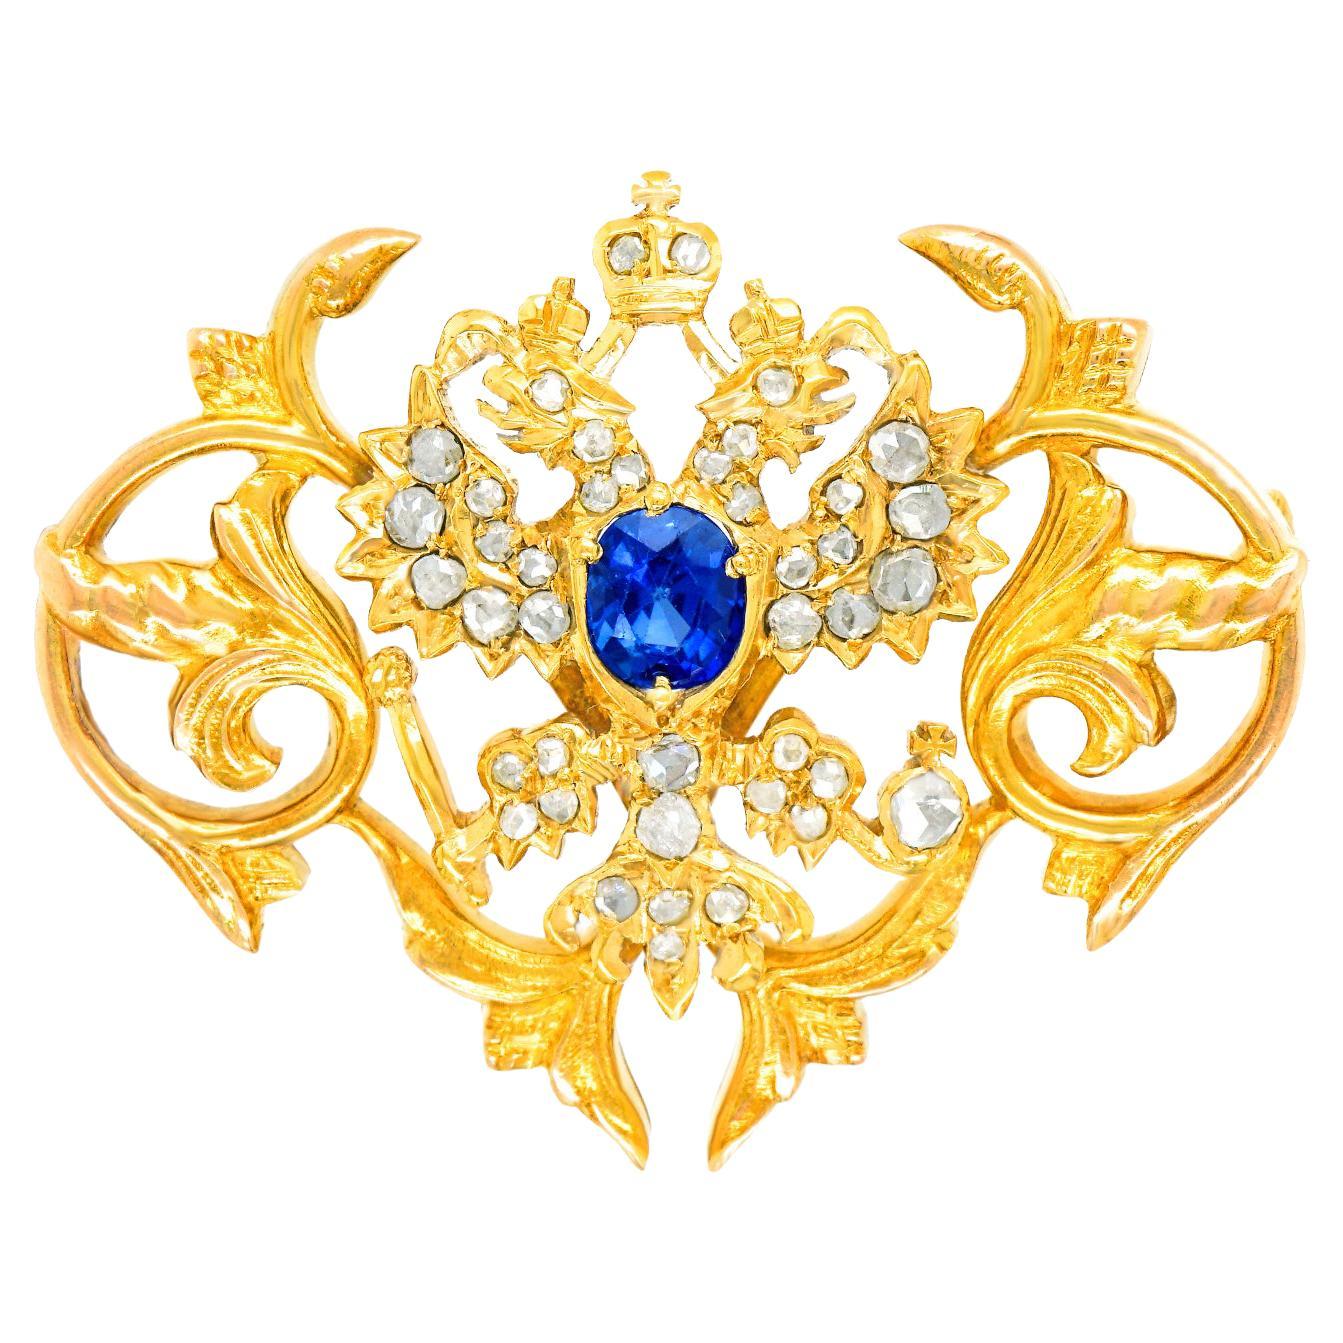 Imperial Romanov Crest Brooch For Sale